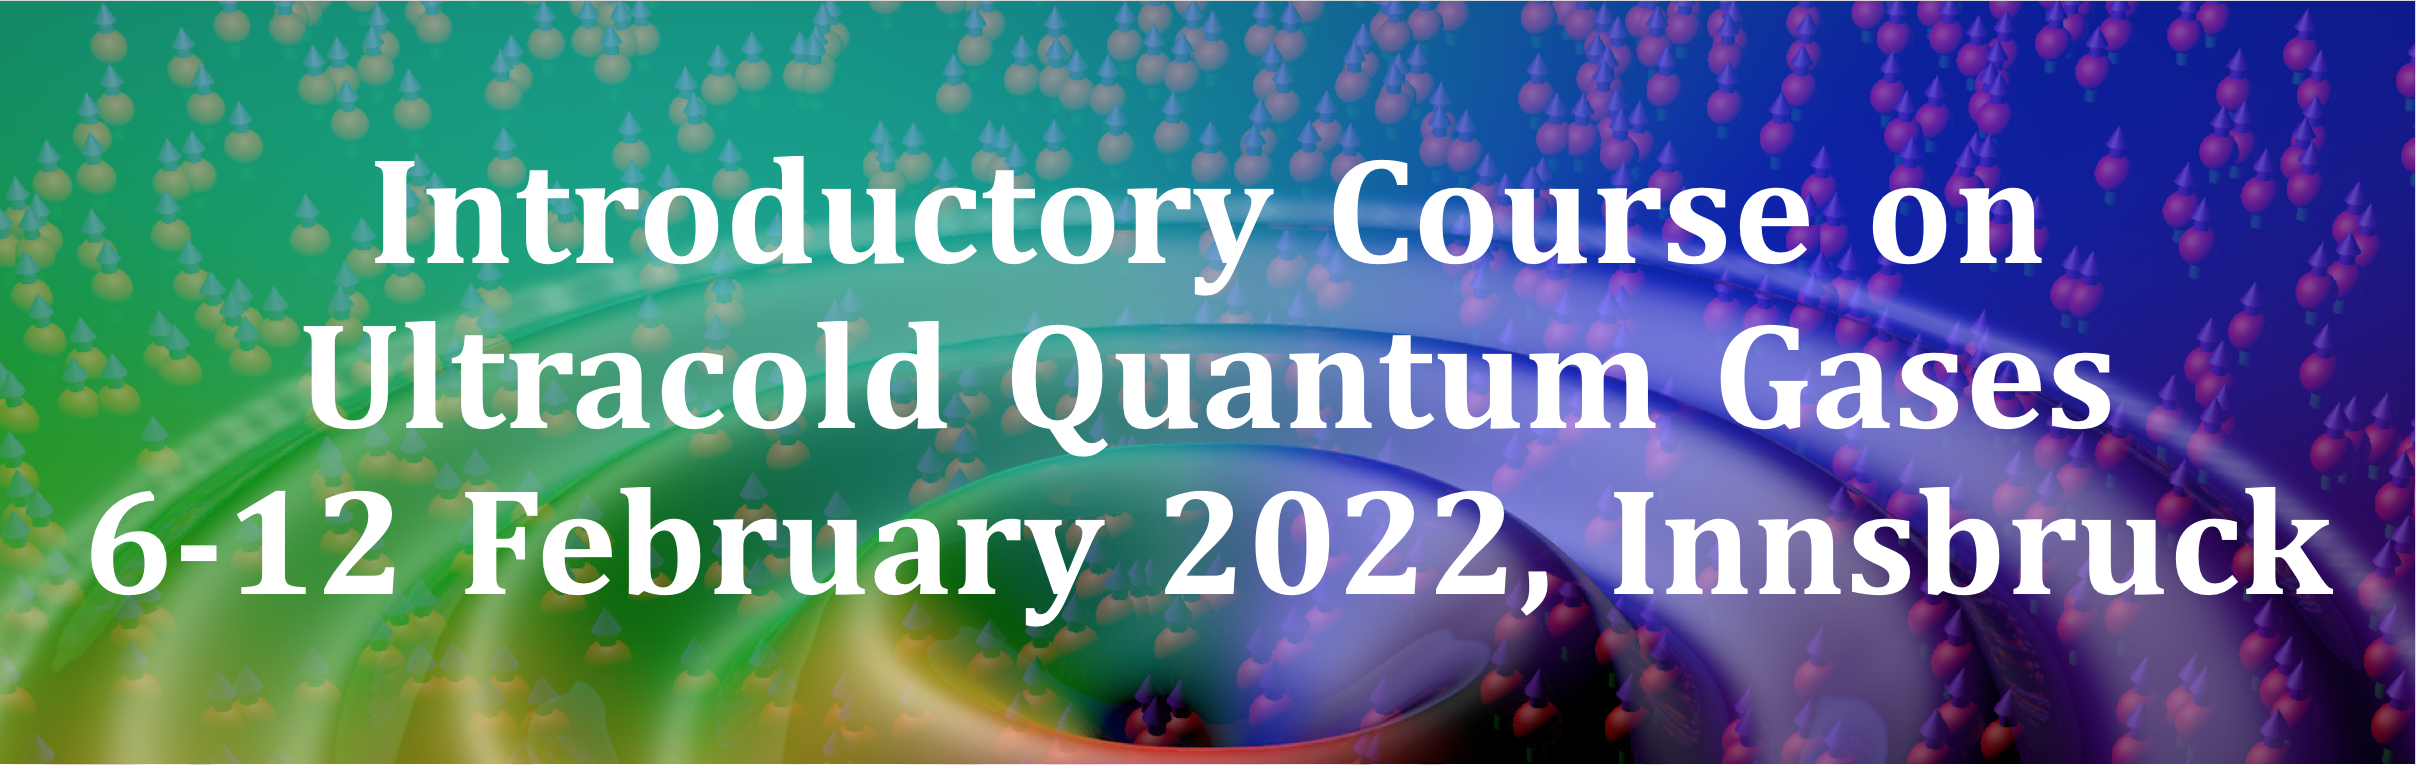 Introductory Course on Ultracold Quantum Gases 2022